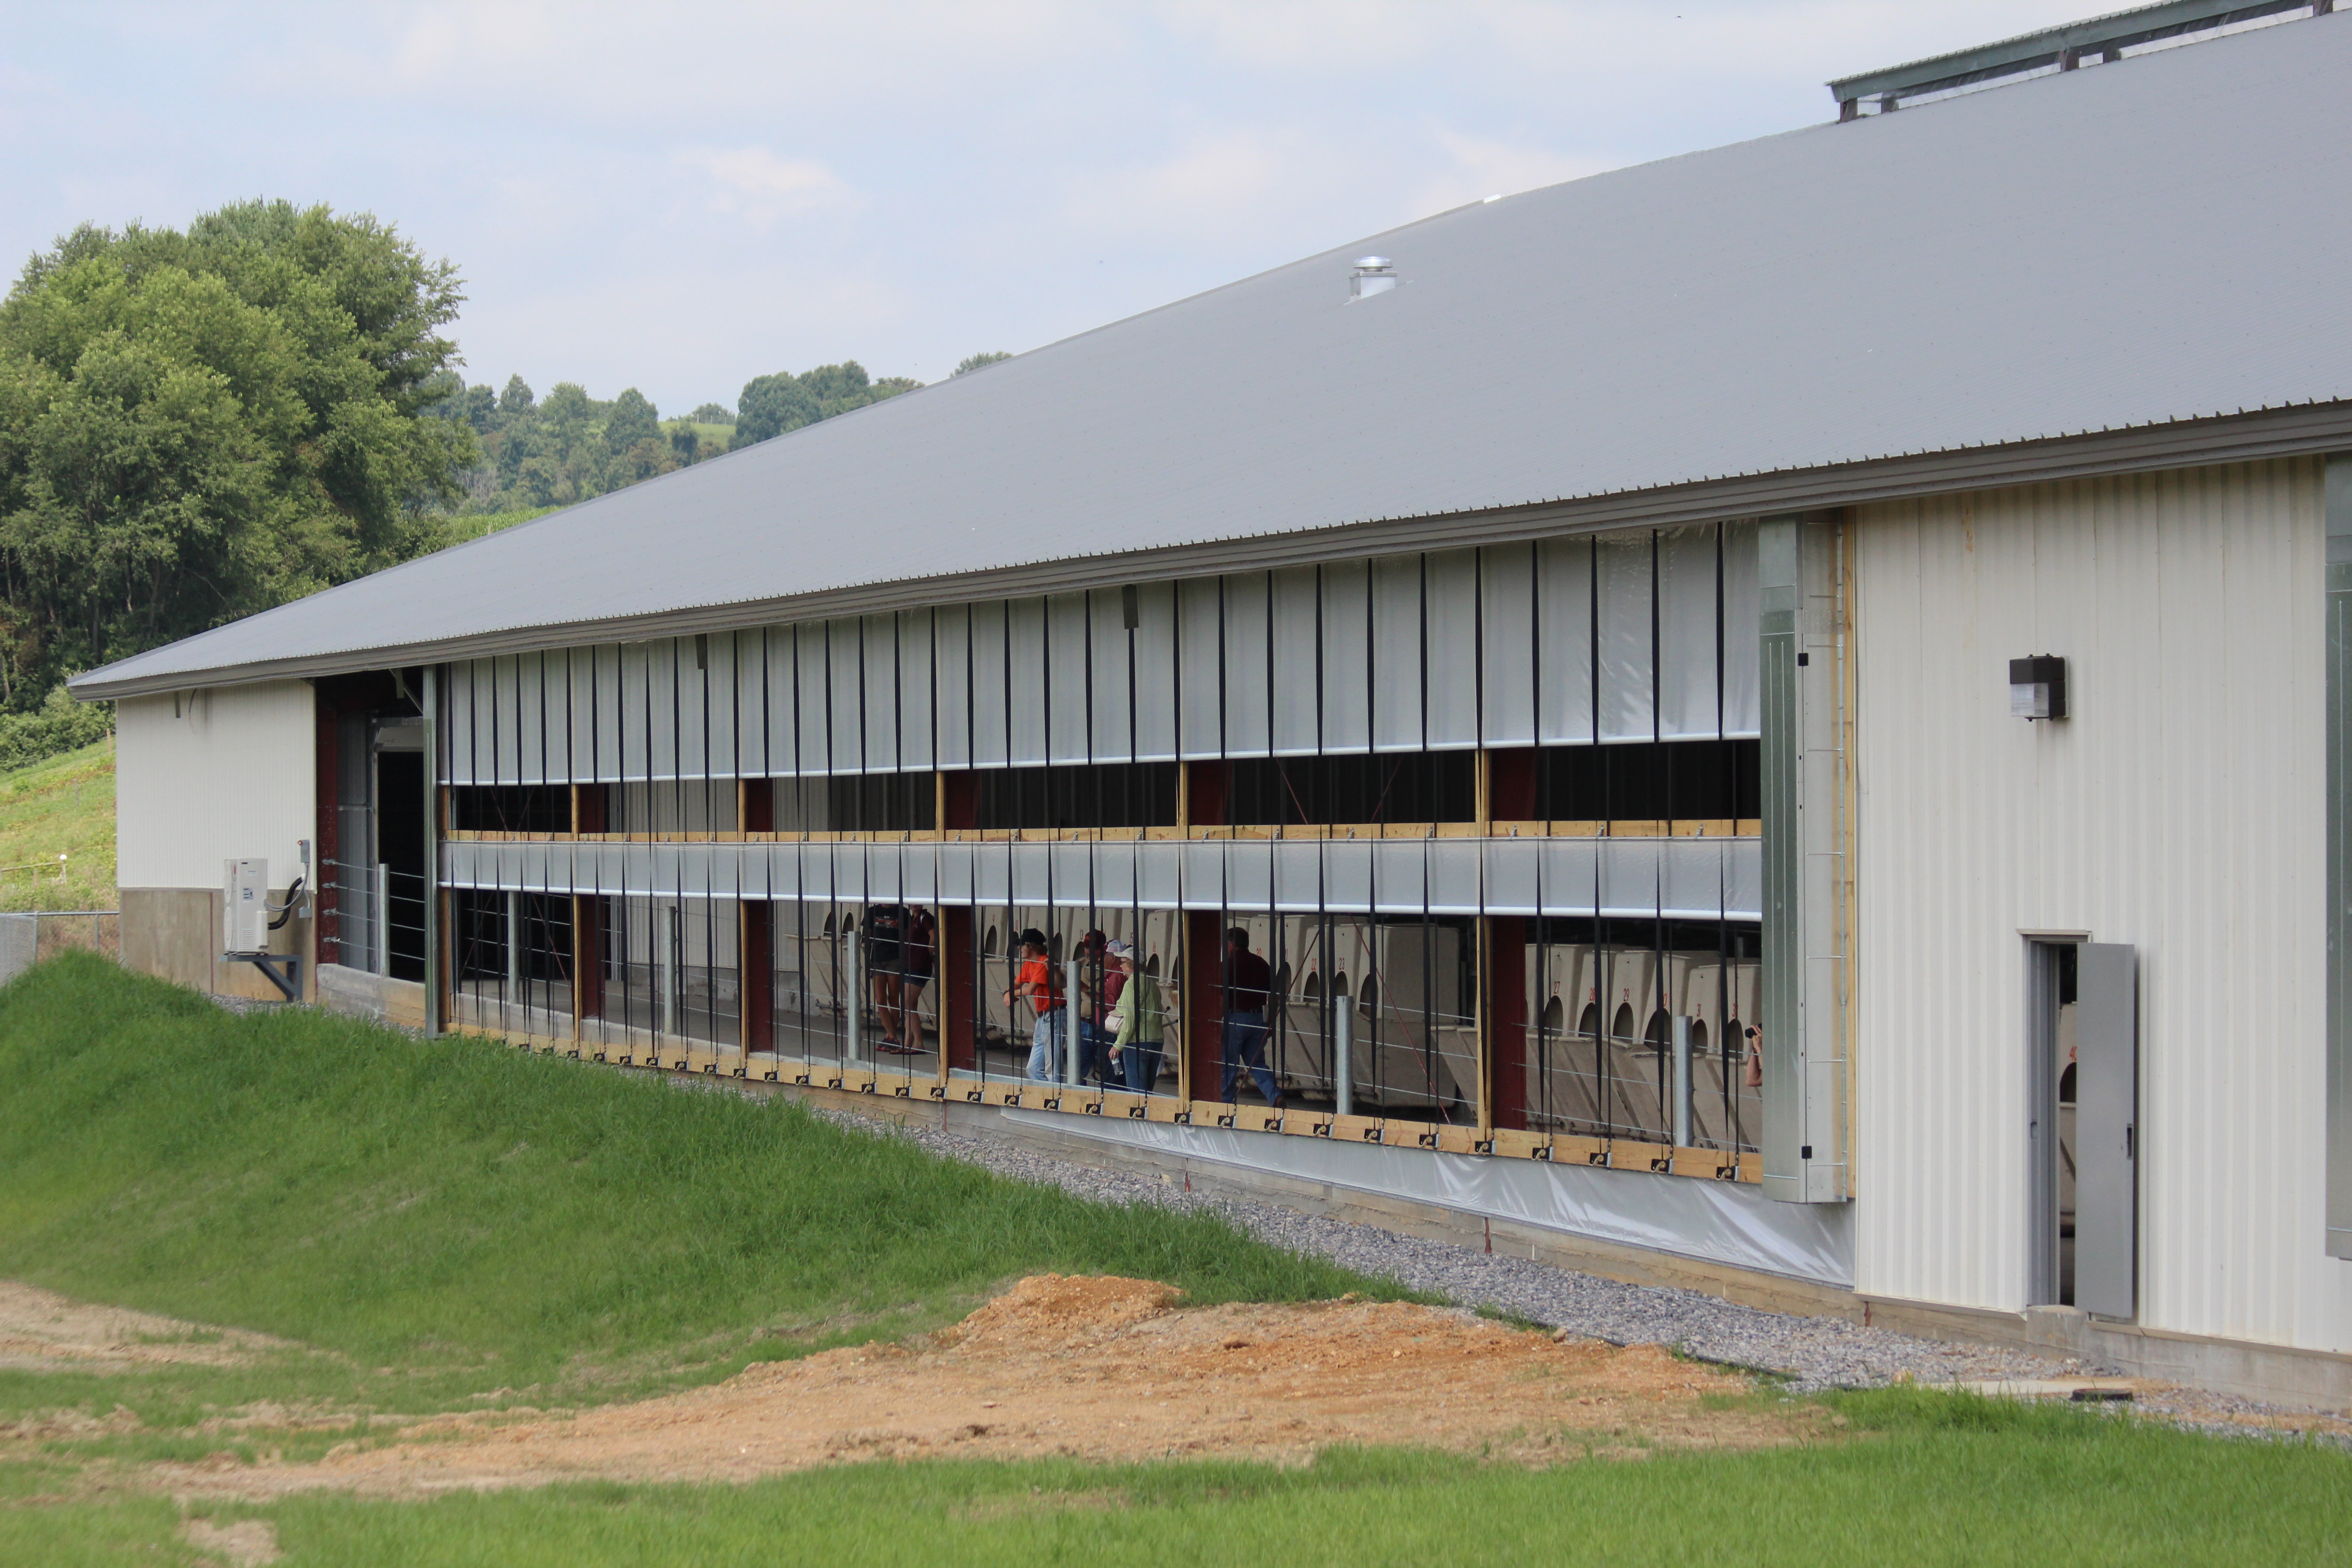 People tour a dairy barn lined with troughs.